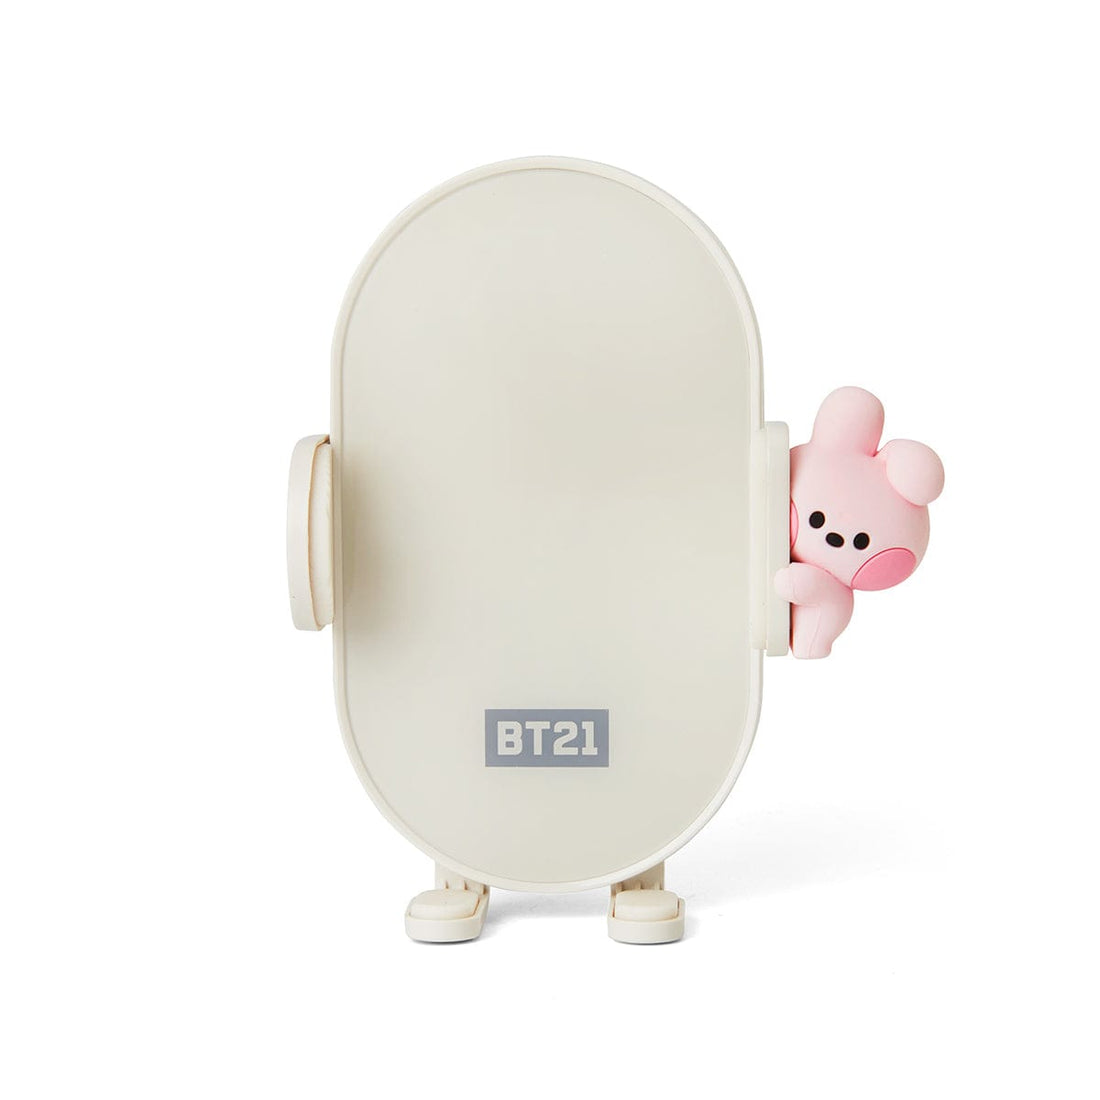 LINE FRIENDS LIVING COOKY BT21 COOKY minini WIRELESS CAR CHARGER